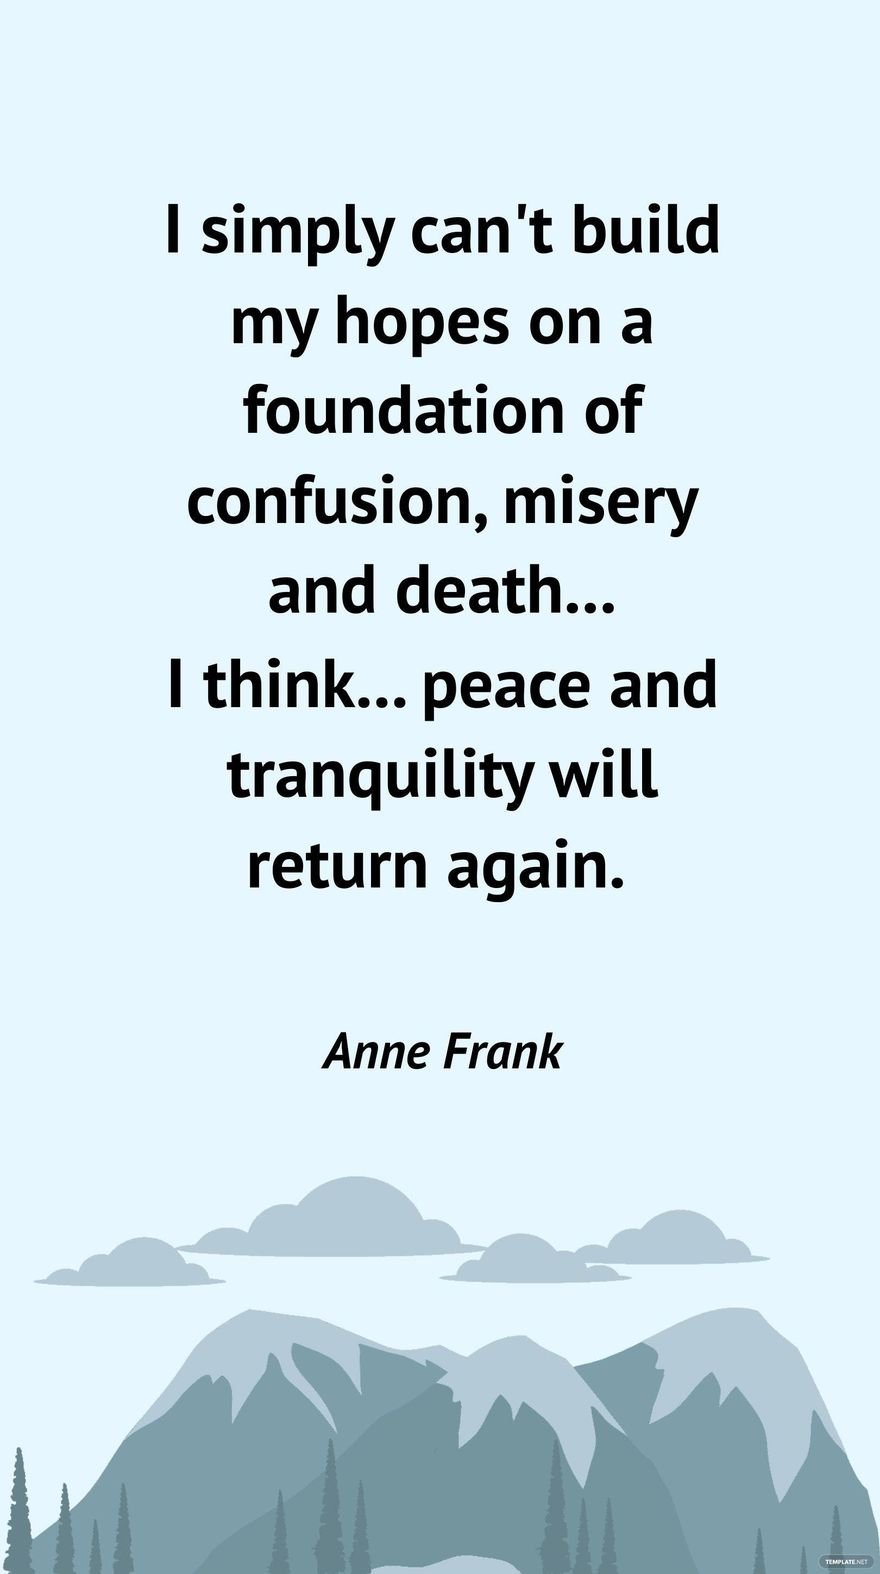 Anne Frank - I simply can't build my hopes on a foundation of confusion, misery and death... I think... peace and tranquility will return again. Template